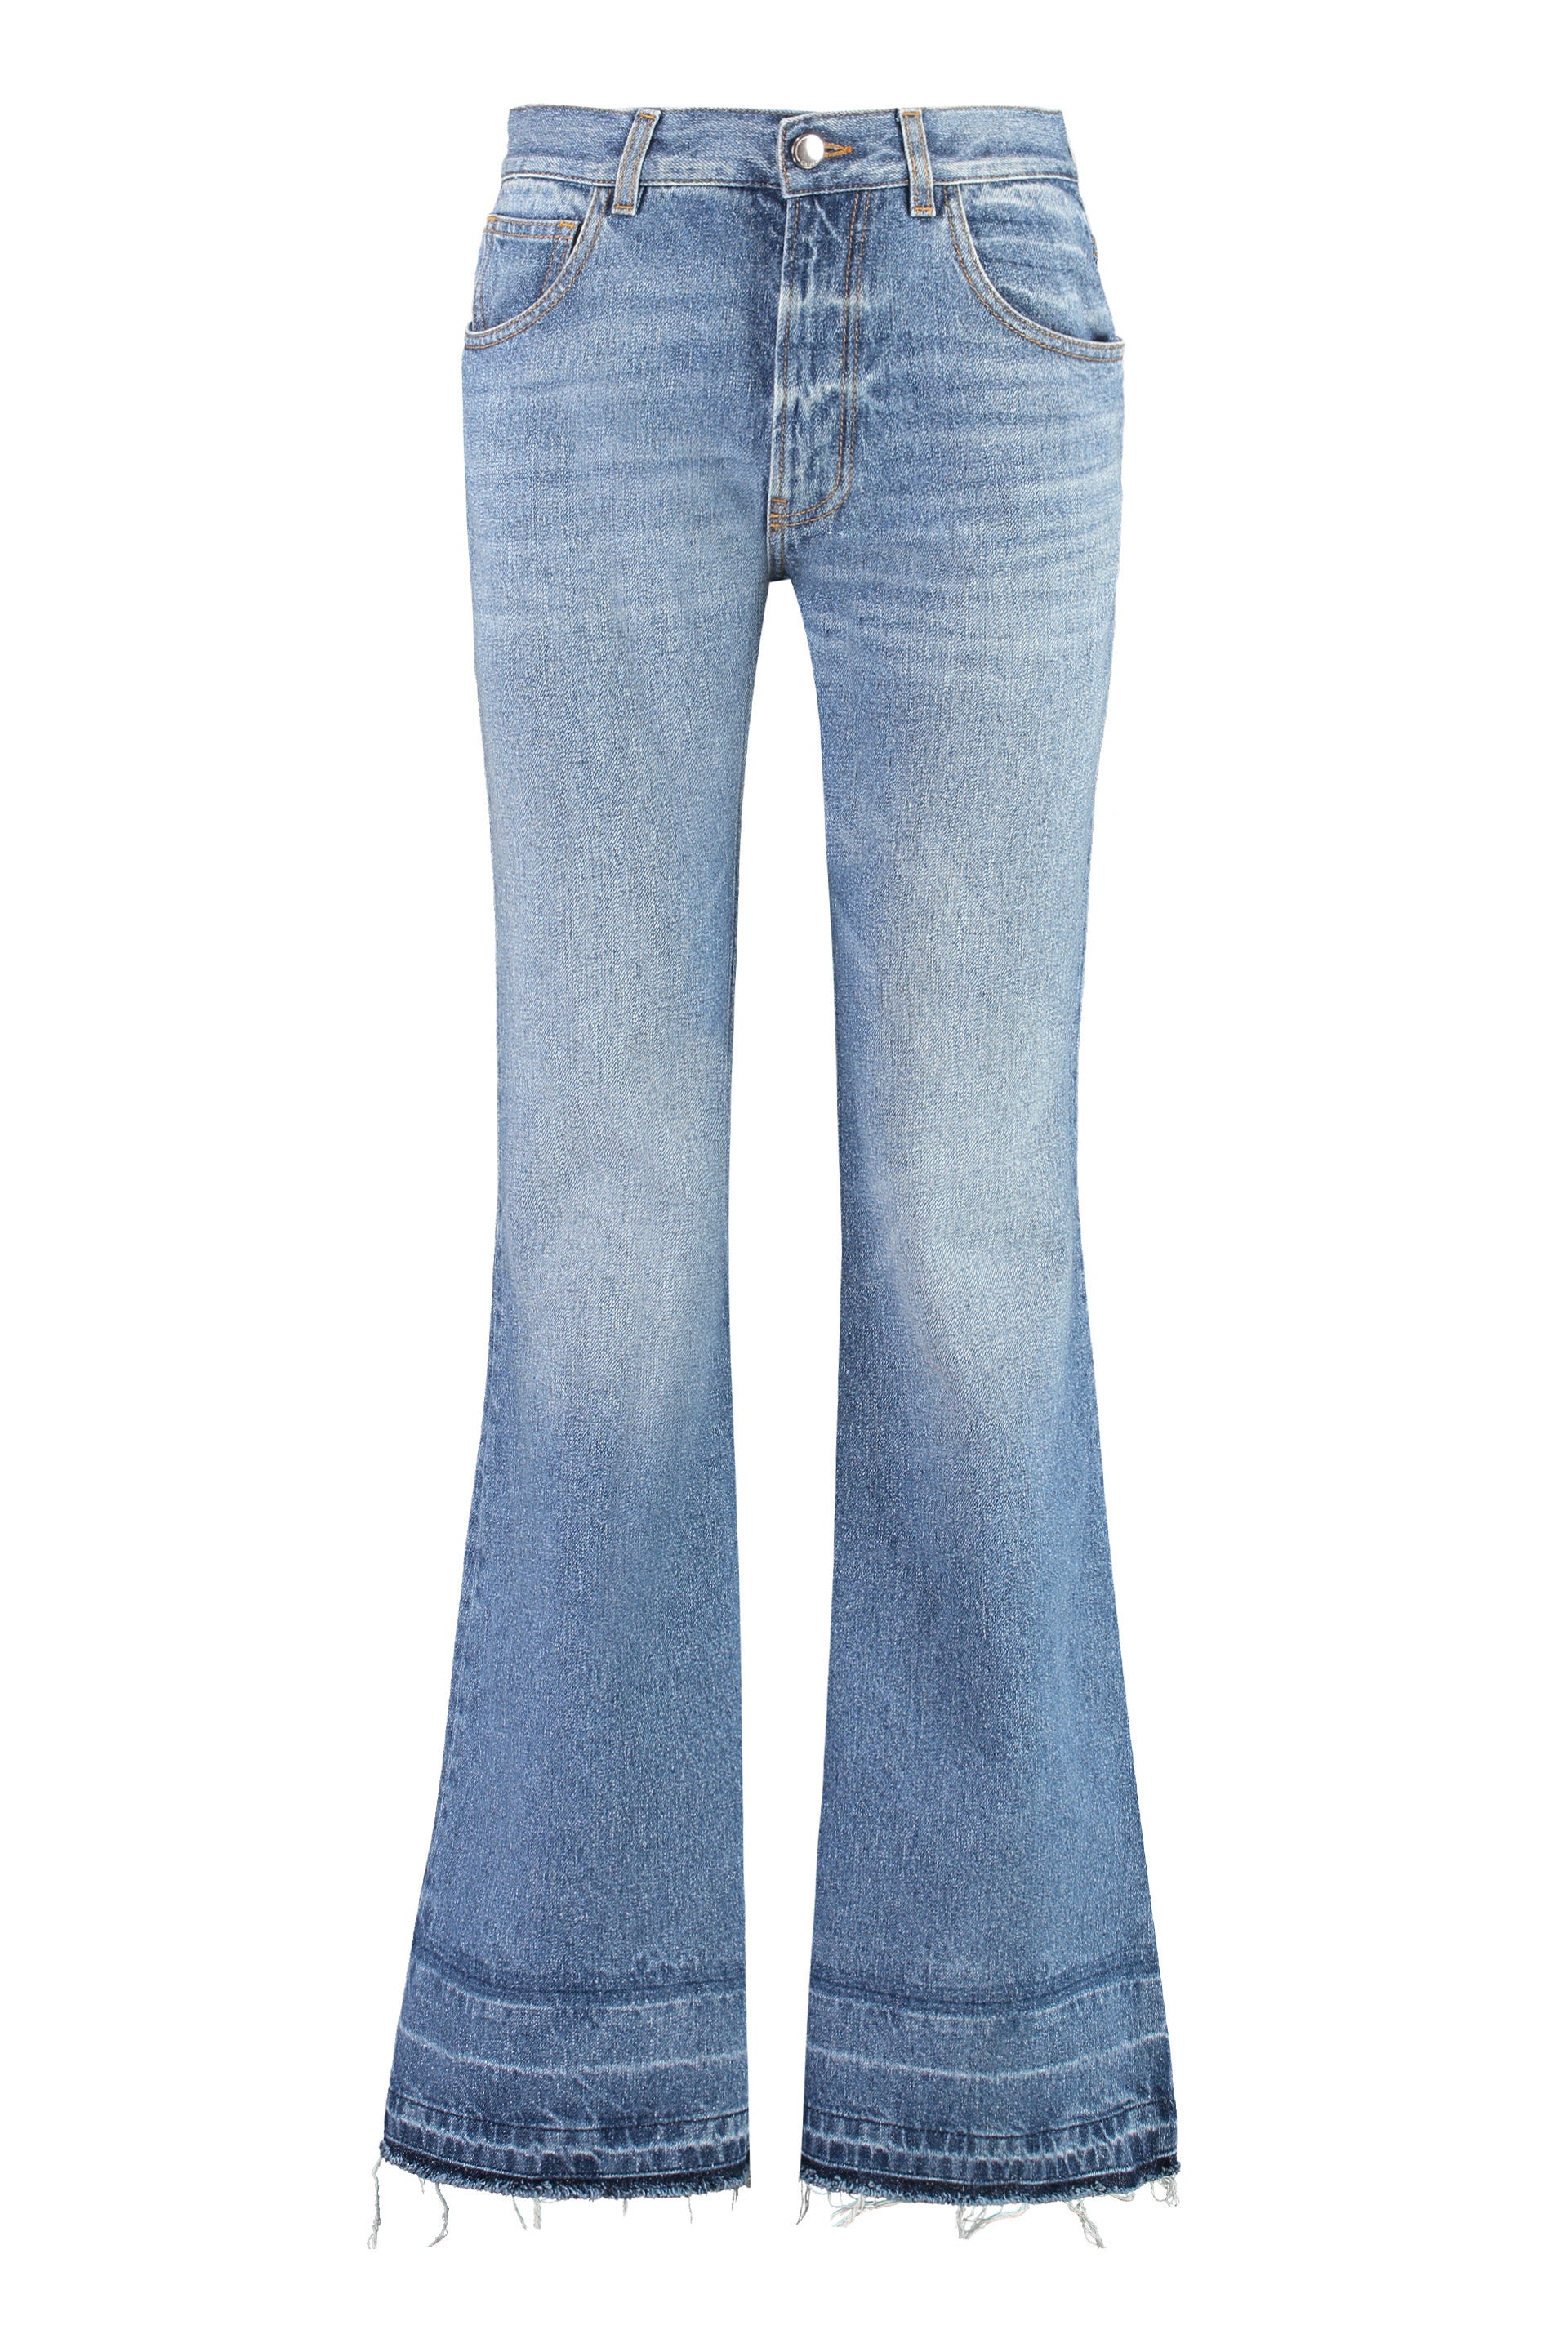 Chloé Flared Low-rise Denim Jeans With Visible Stitching And Fringed Hemline For Women In Blue